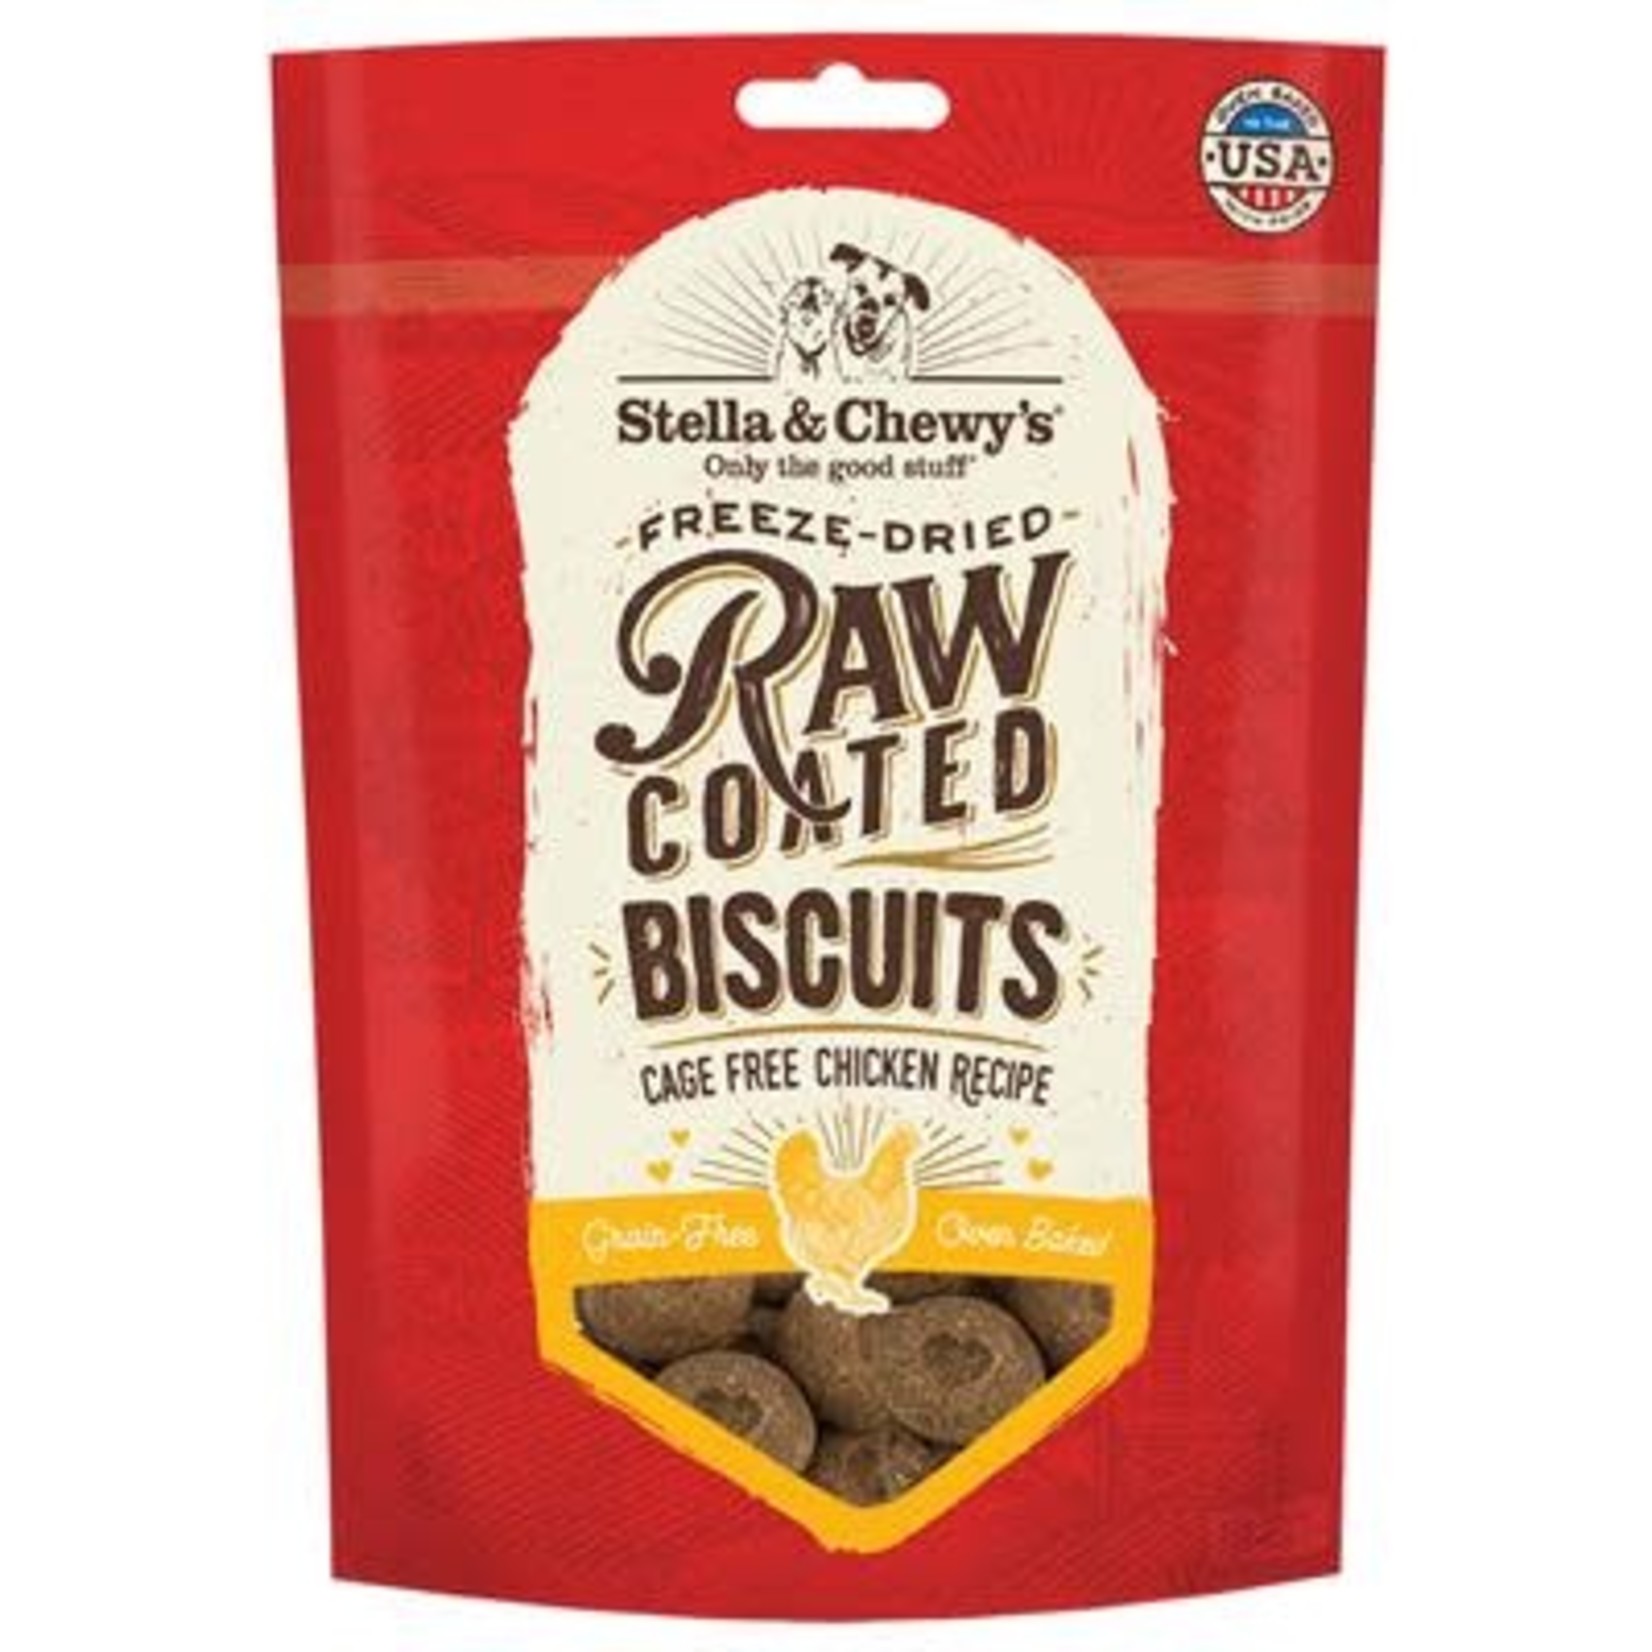 Stella & chewy's SC FD Raw Coated Biscuits 9OZ